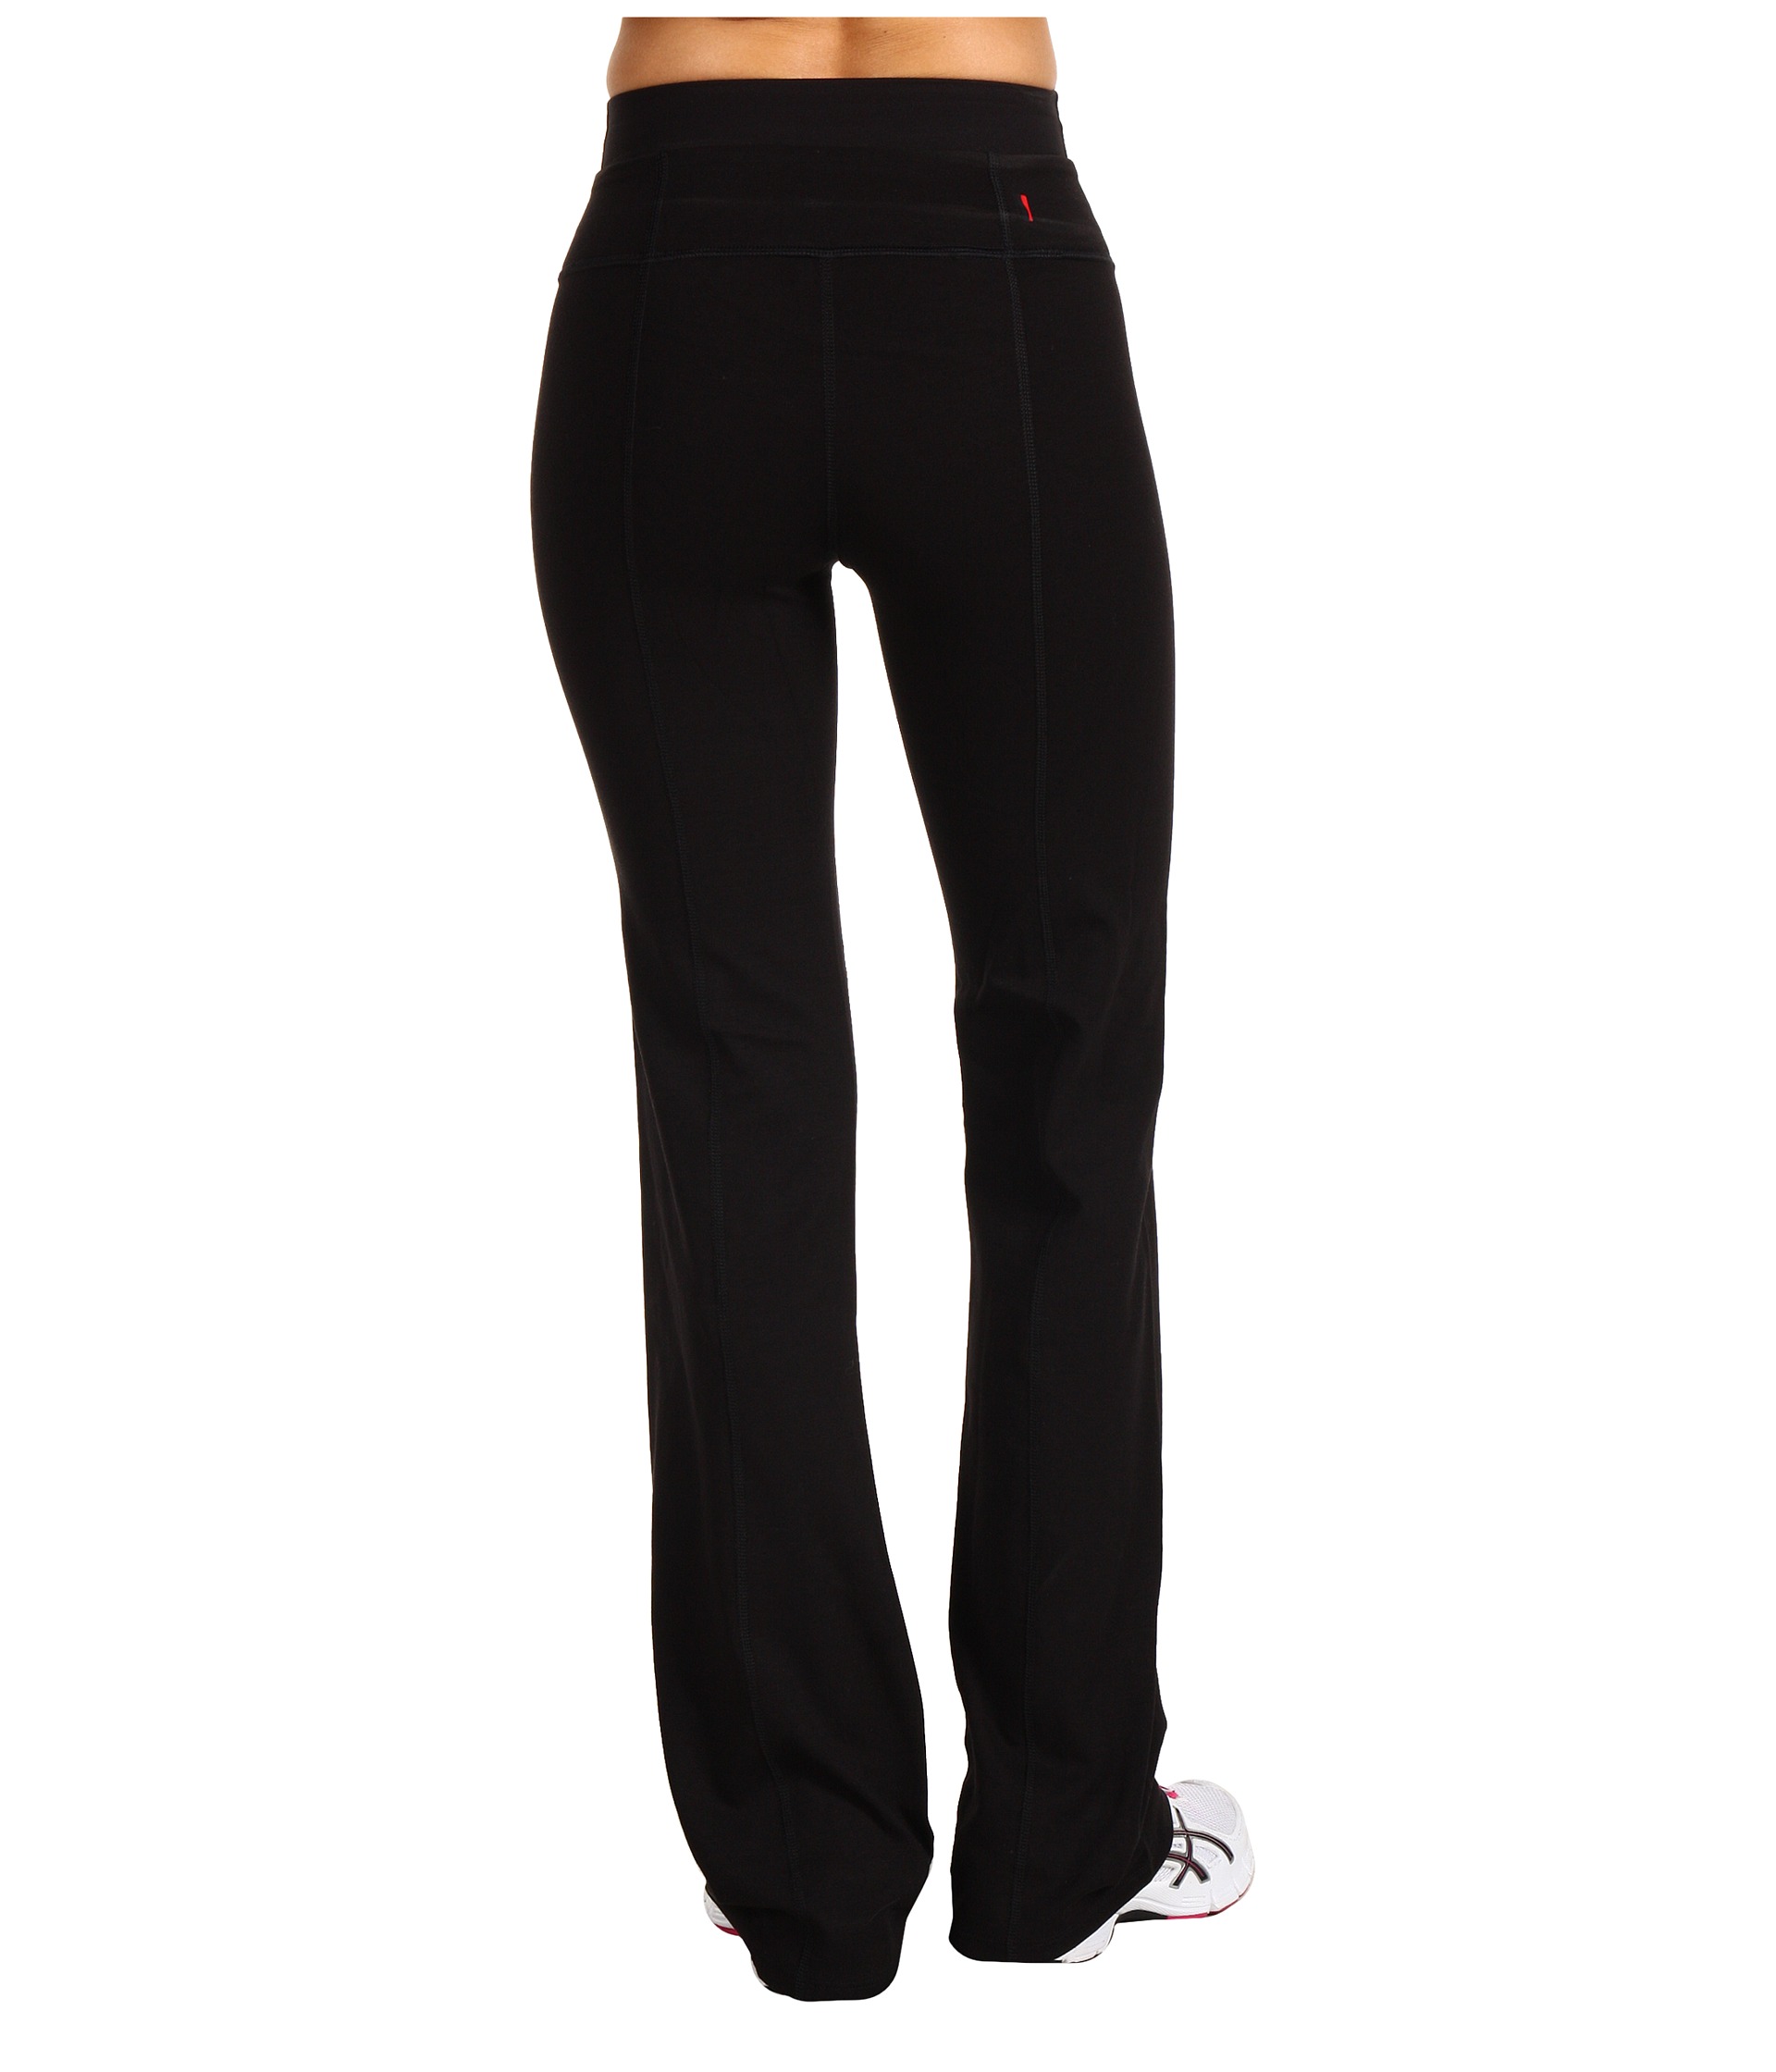 Spanx Active Power Pant - Zappos.com Free Shipping BOTH Ways